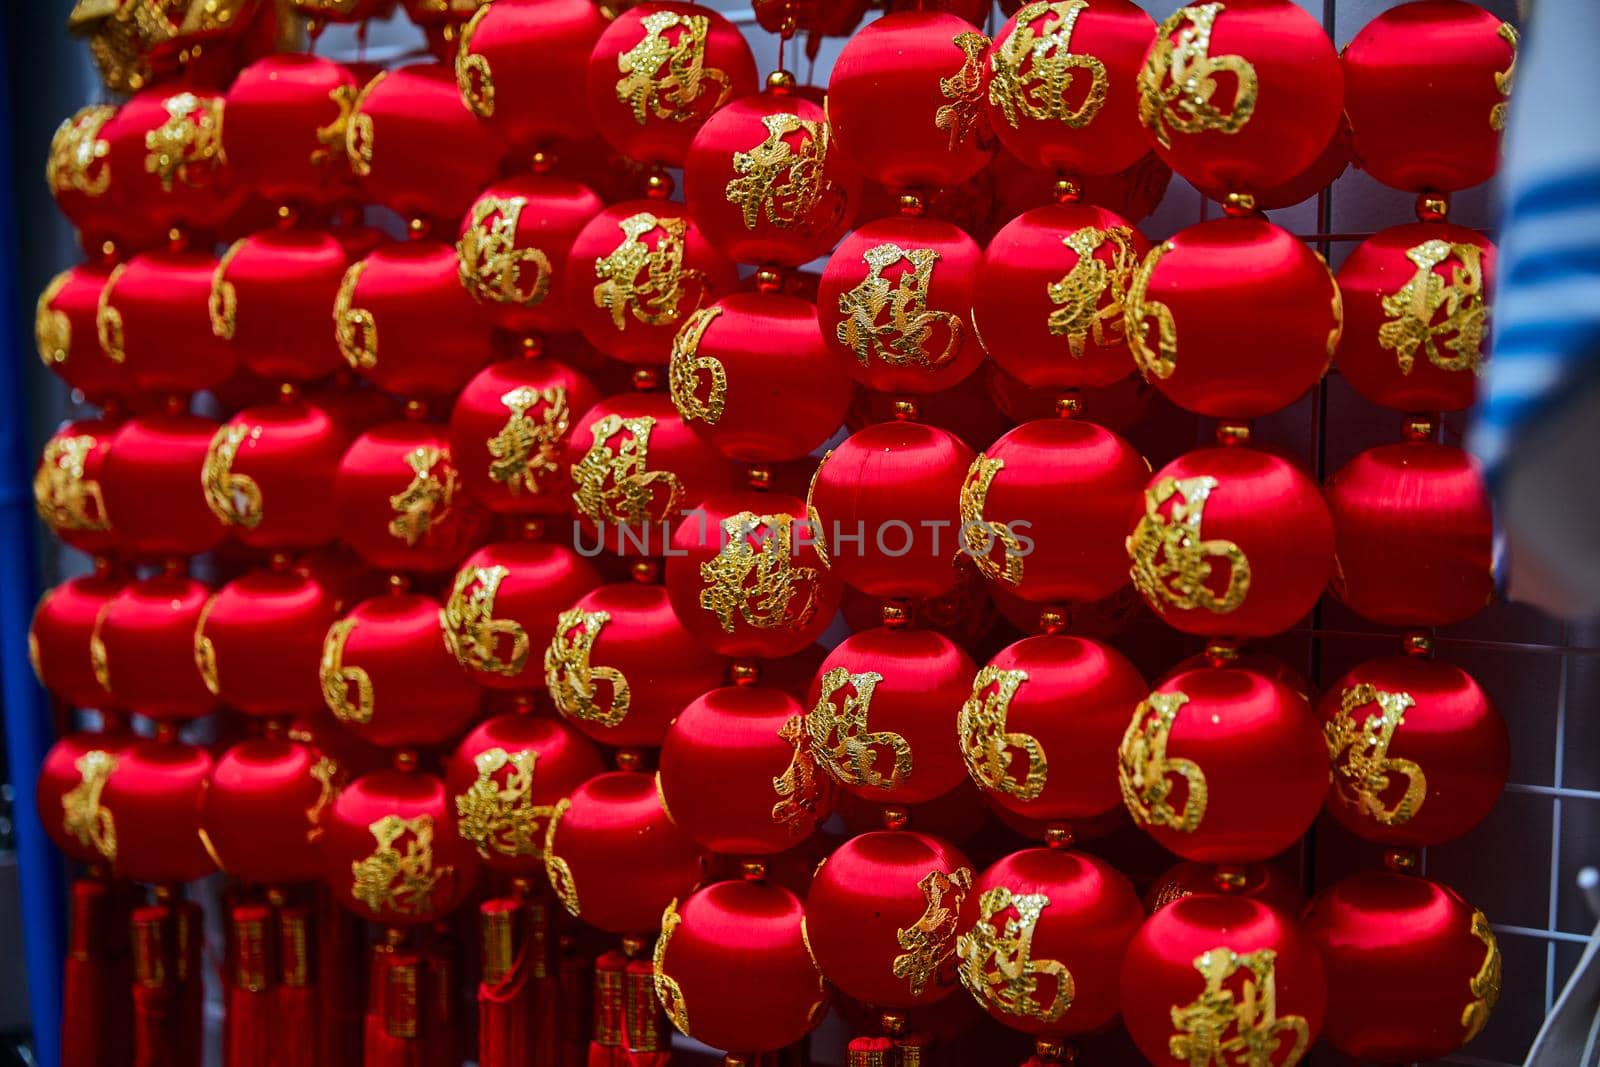 Decorations for the Chinese New Year by EvgeniyQW